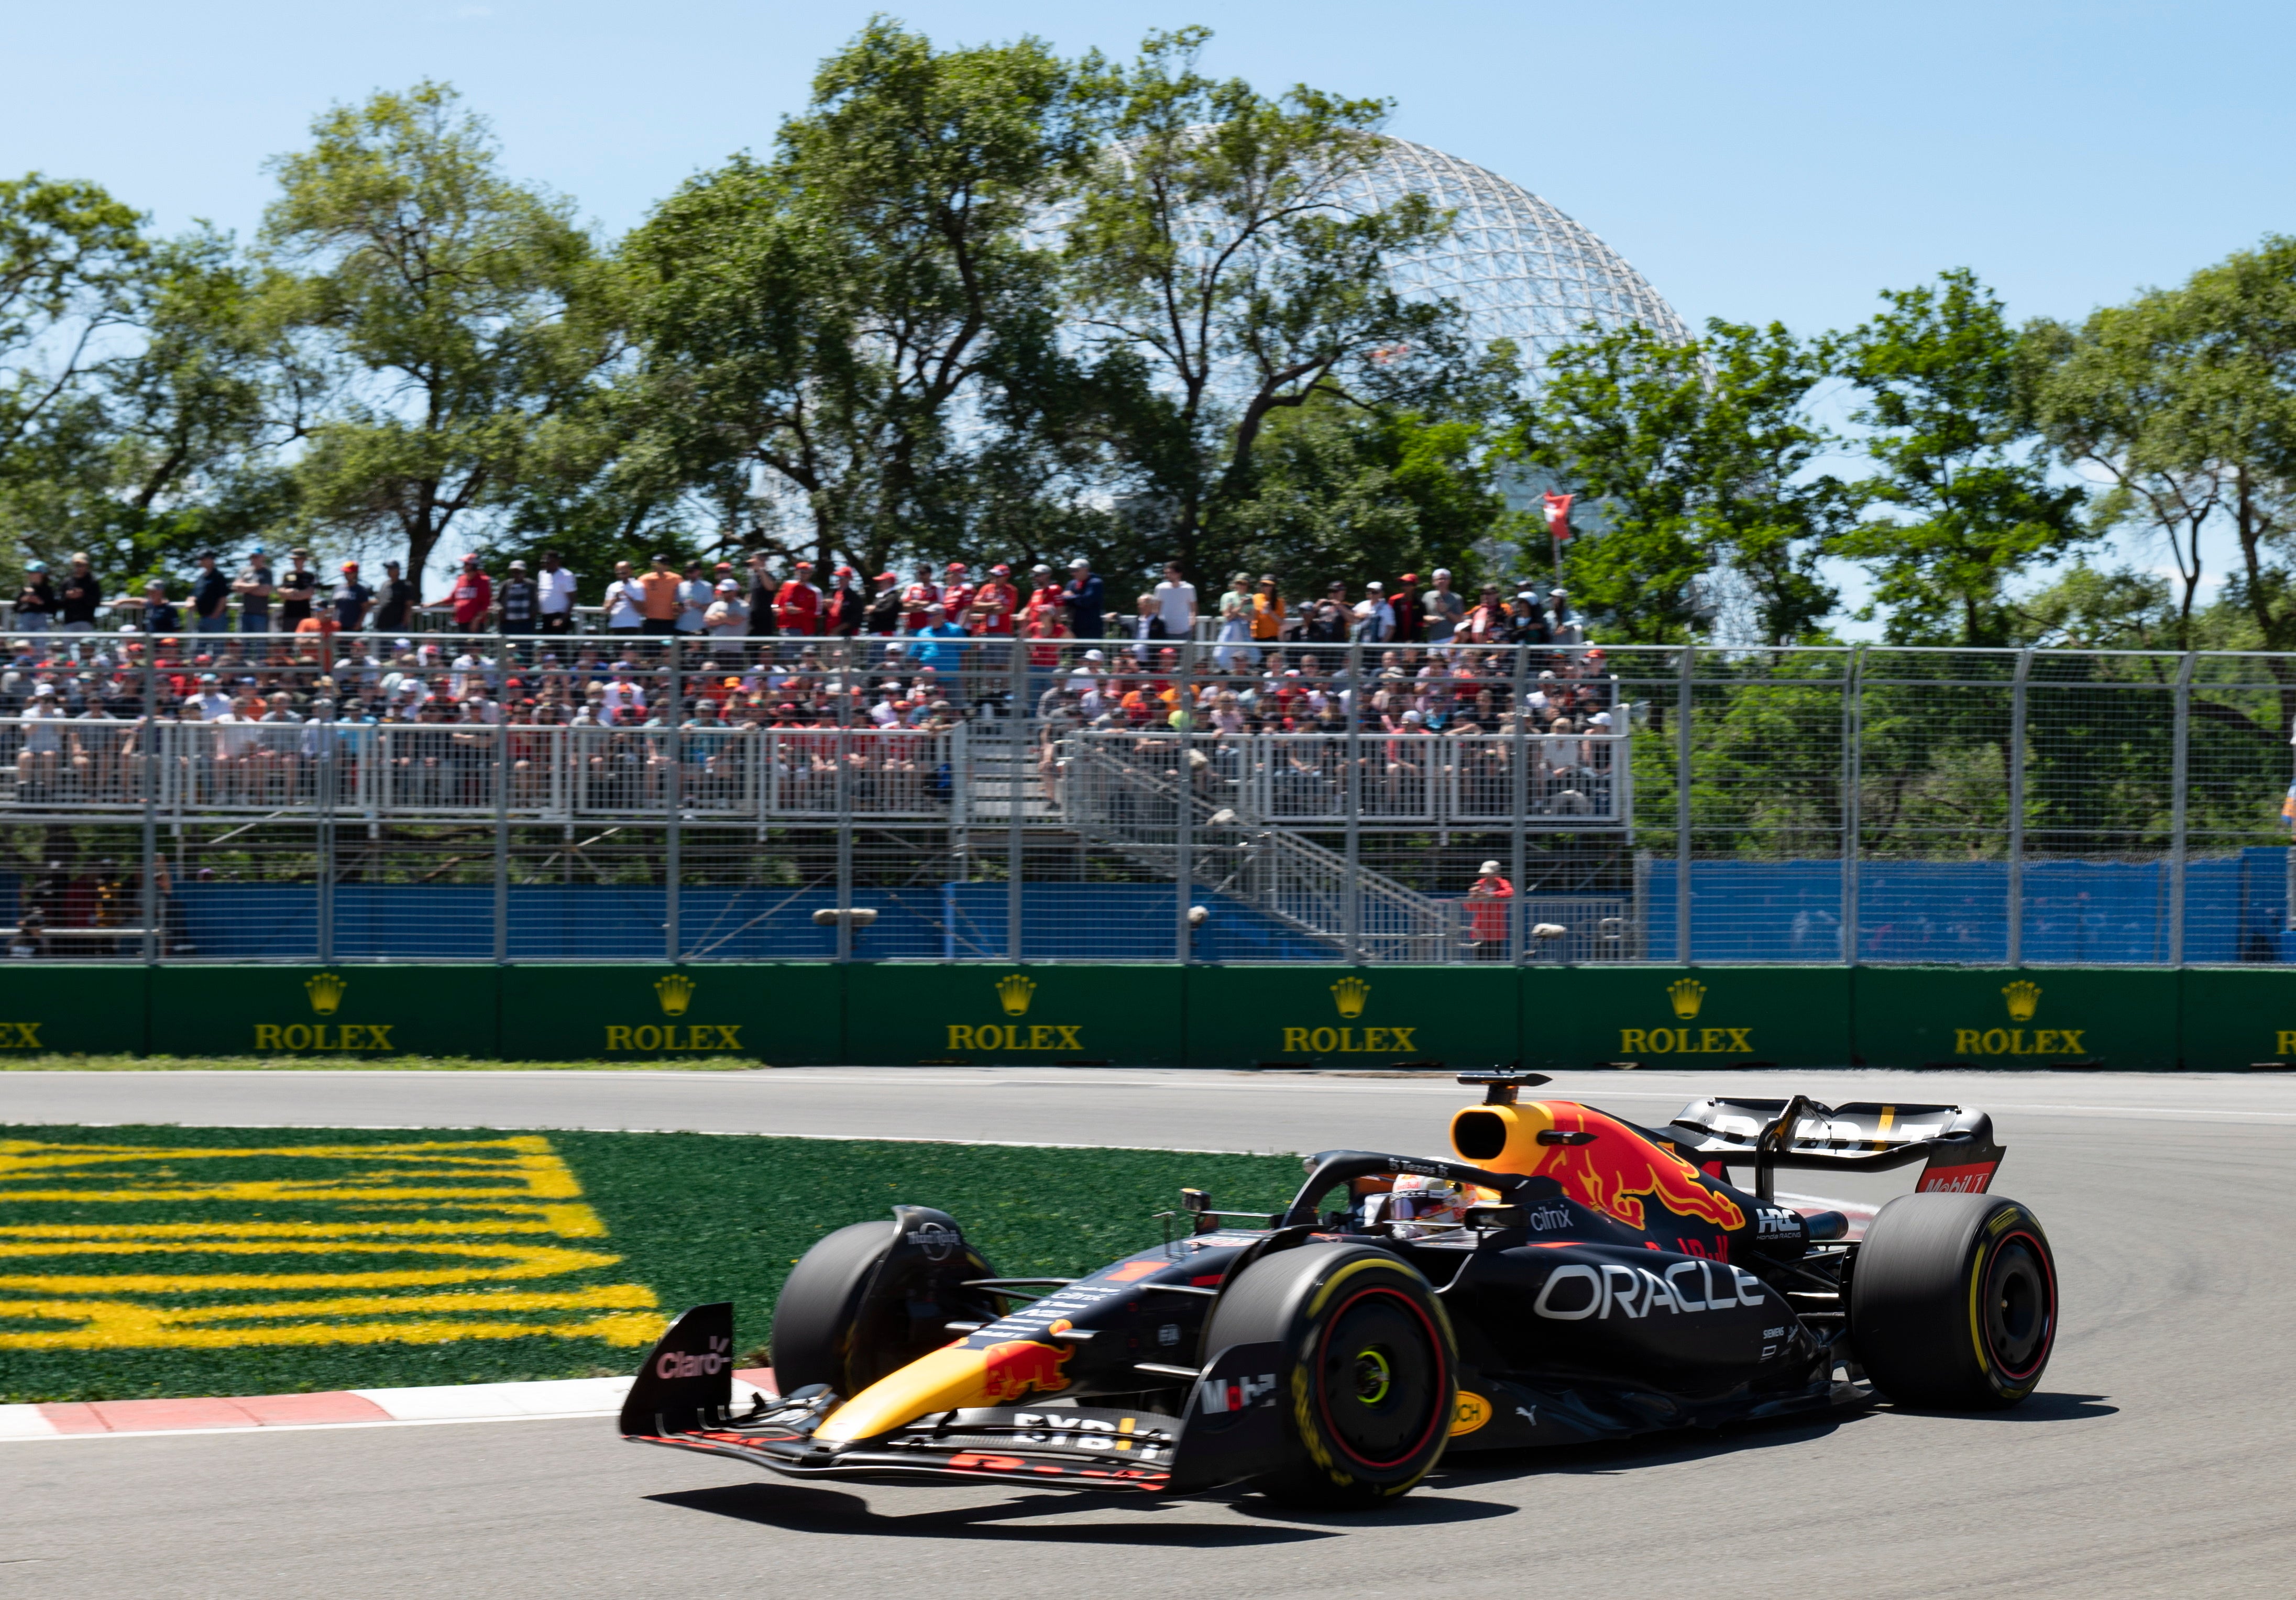 Max Verstappen dominated in Canada to claim his sixth win of the season (Jacques Boissinot/AP)